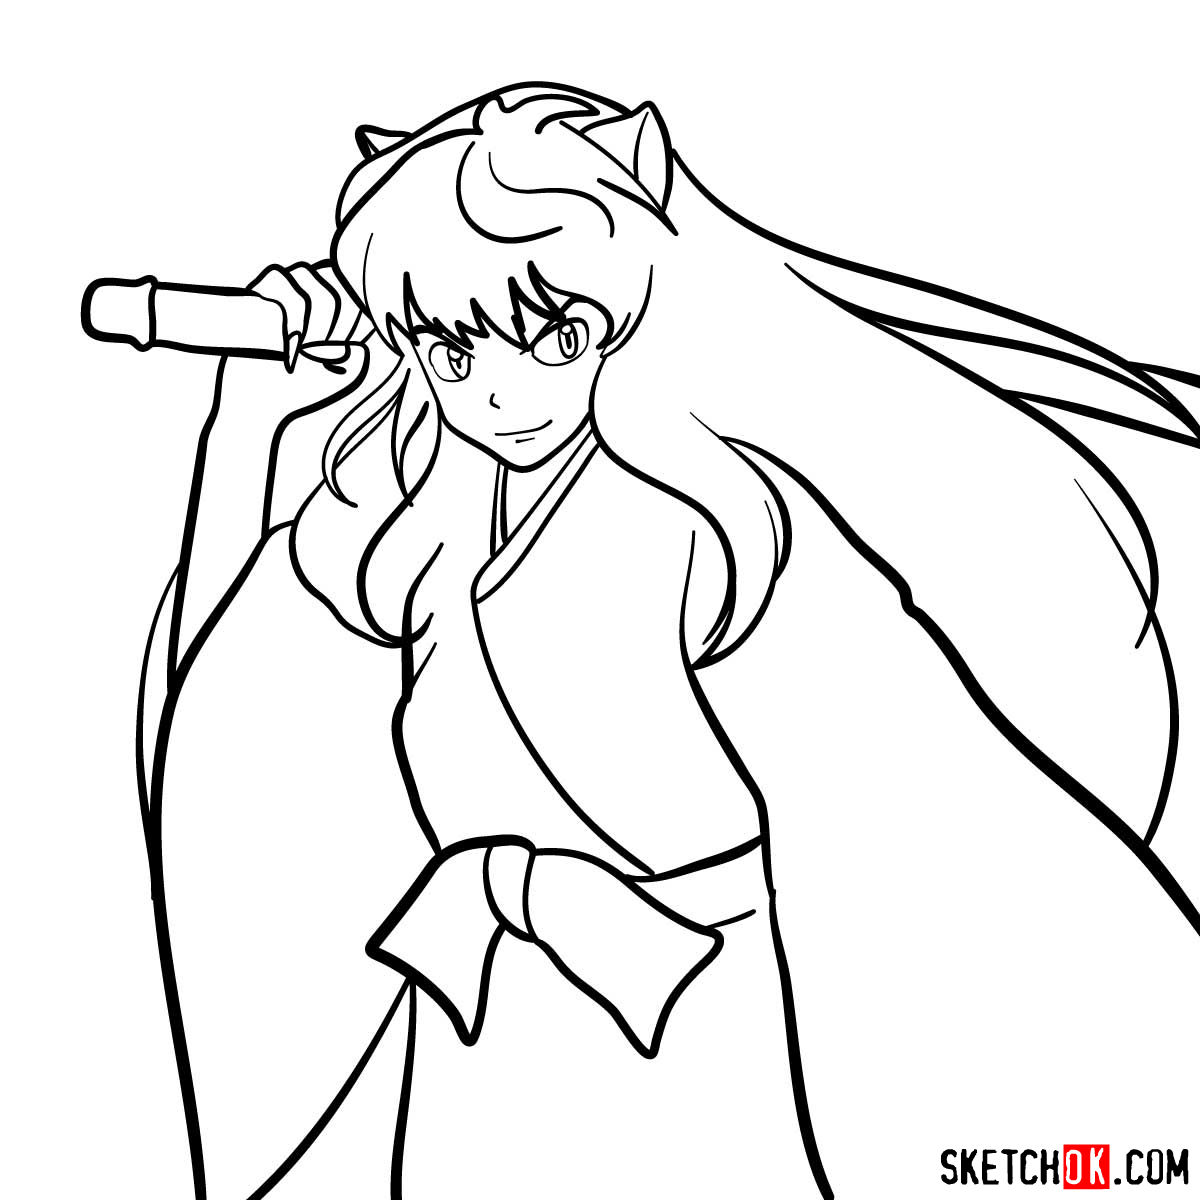 How to draw Inuyasha - 12 steps tutorial